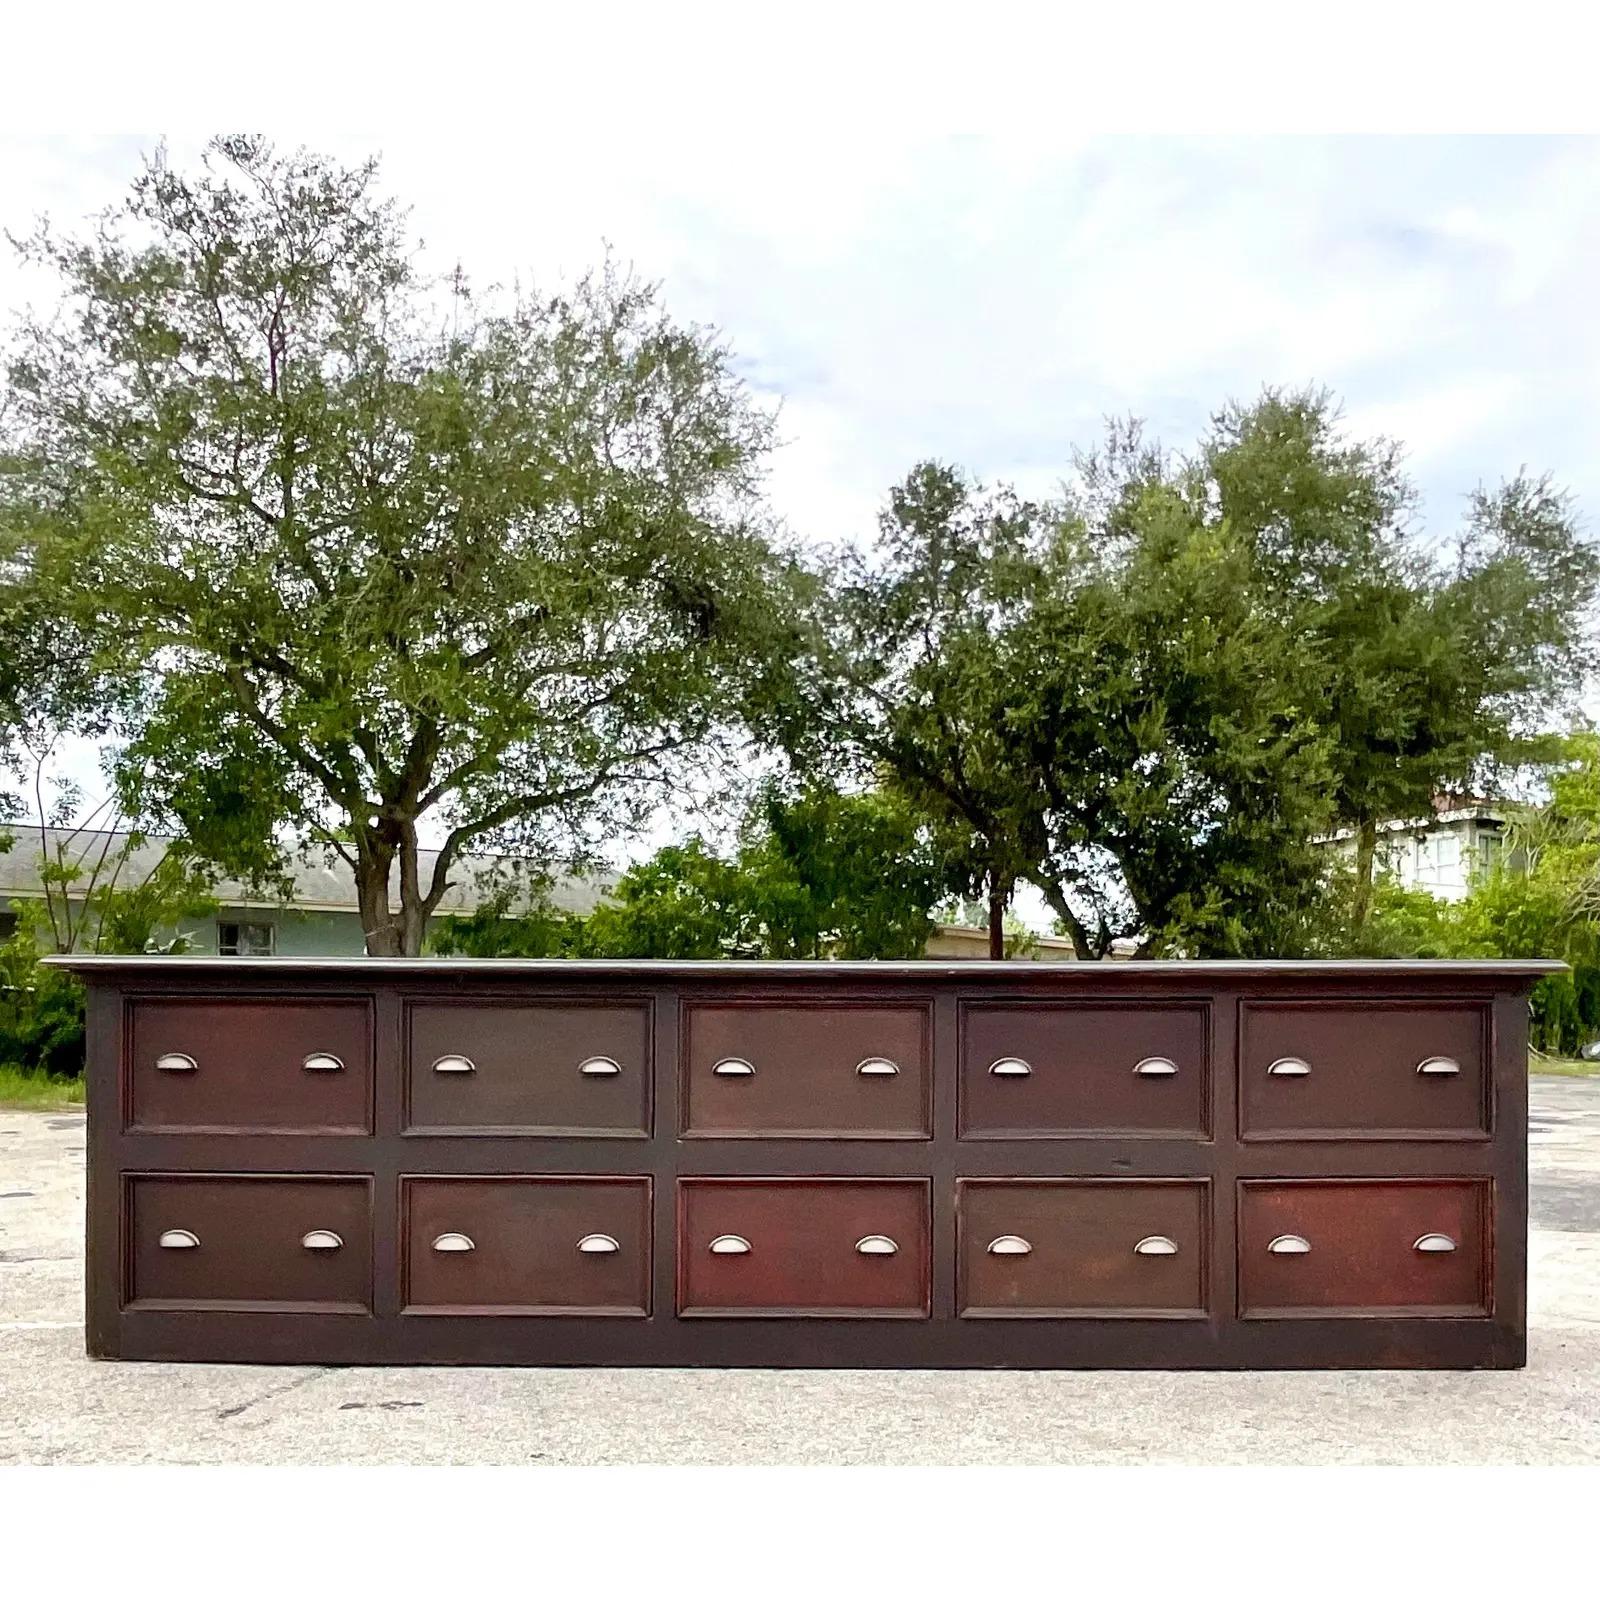 Vintage Monumemtal Rustic Pharmacy Credenza For Sale 2